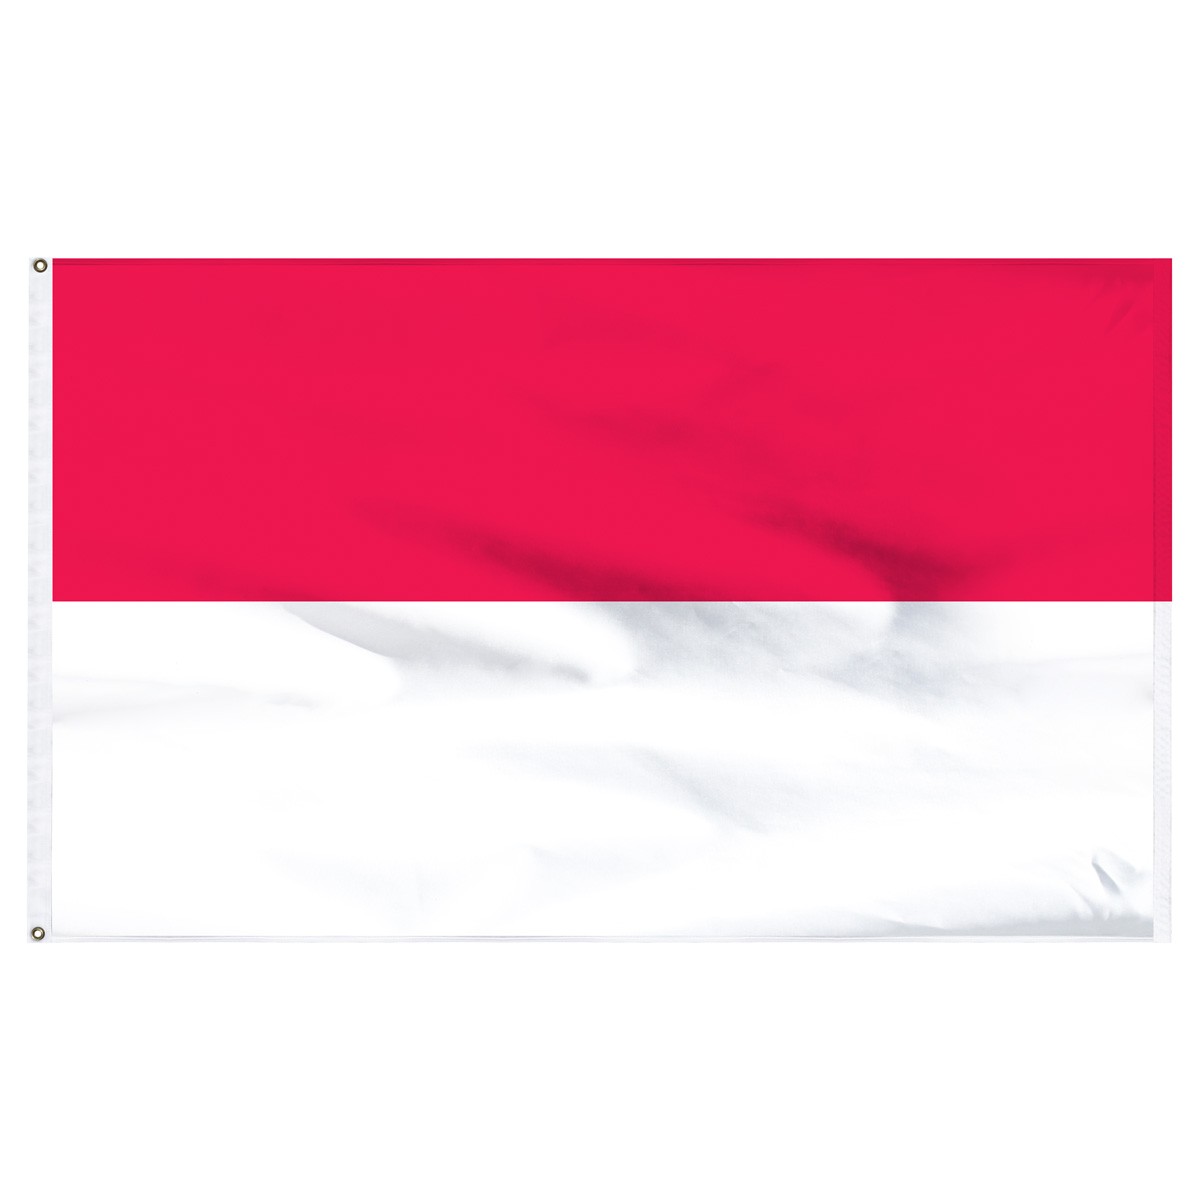 Indonesia Triangle Flags and Pennants